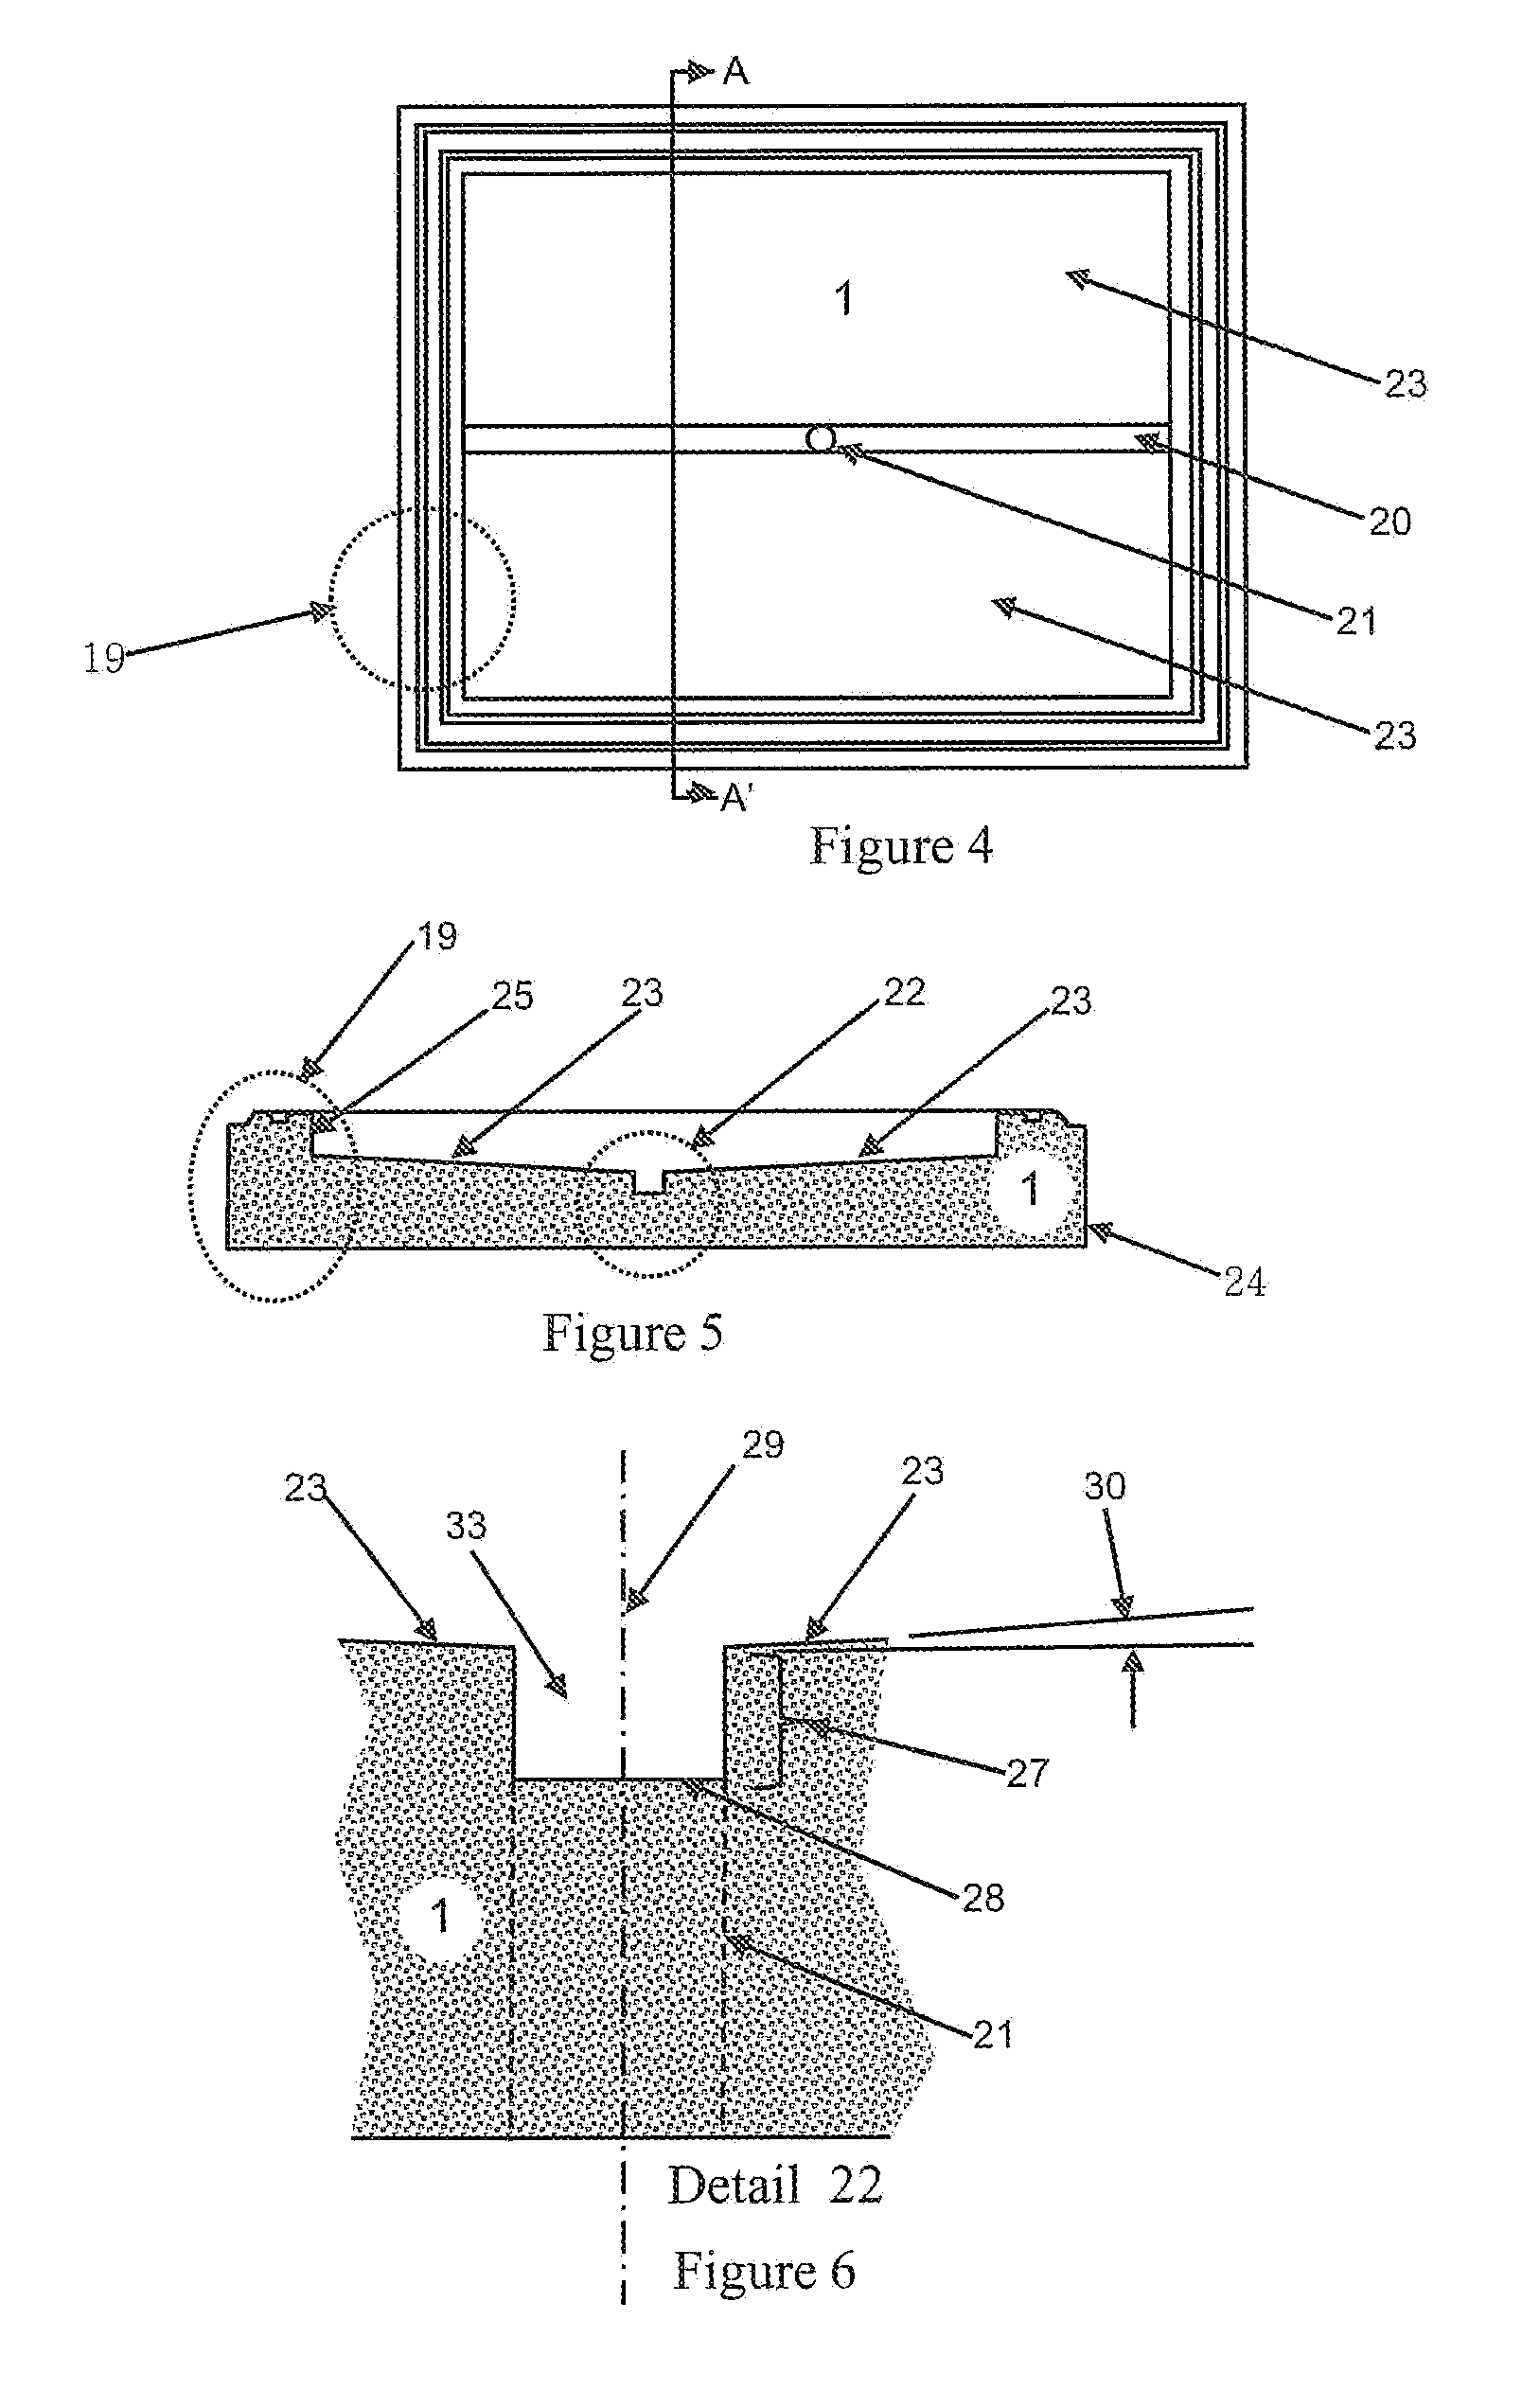 Modular Integrated Underground Utilities Enclosure and Distribution System